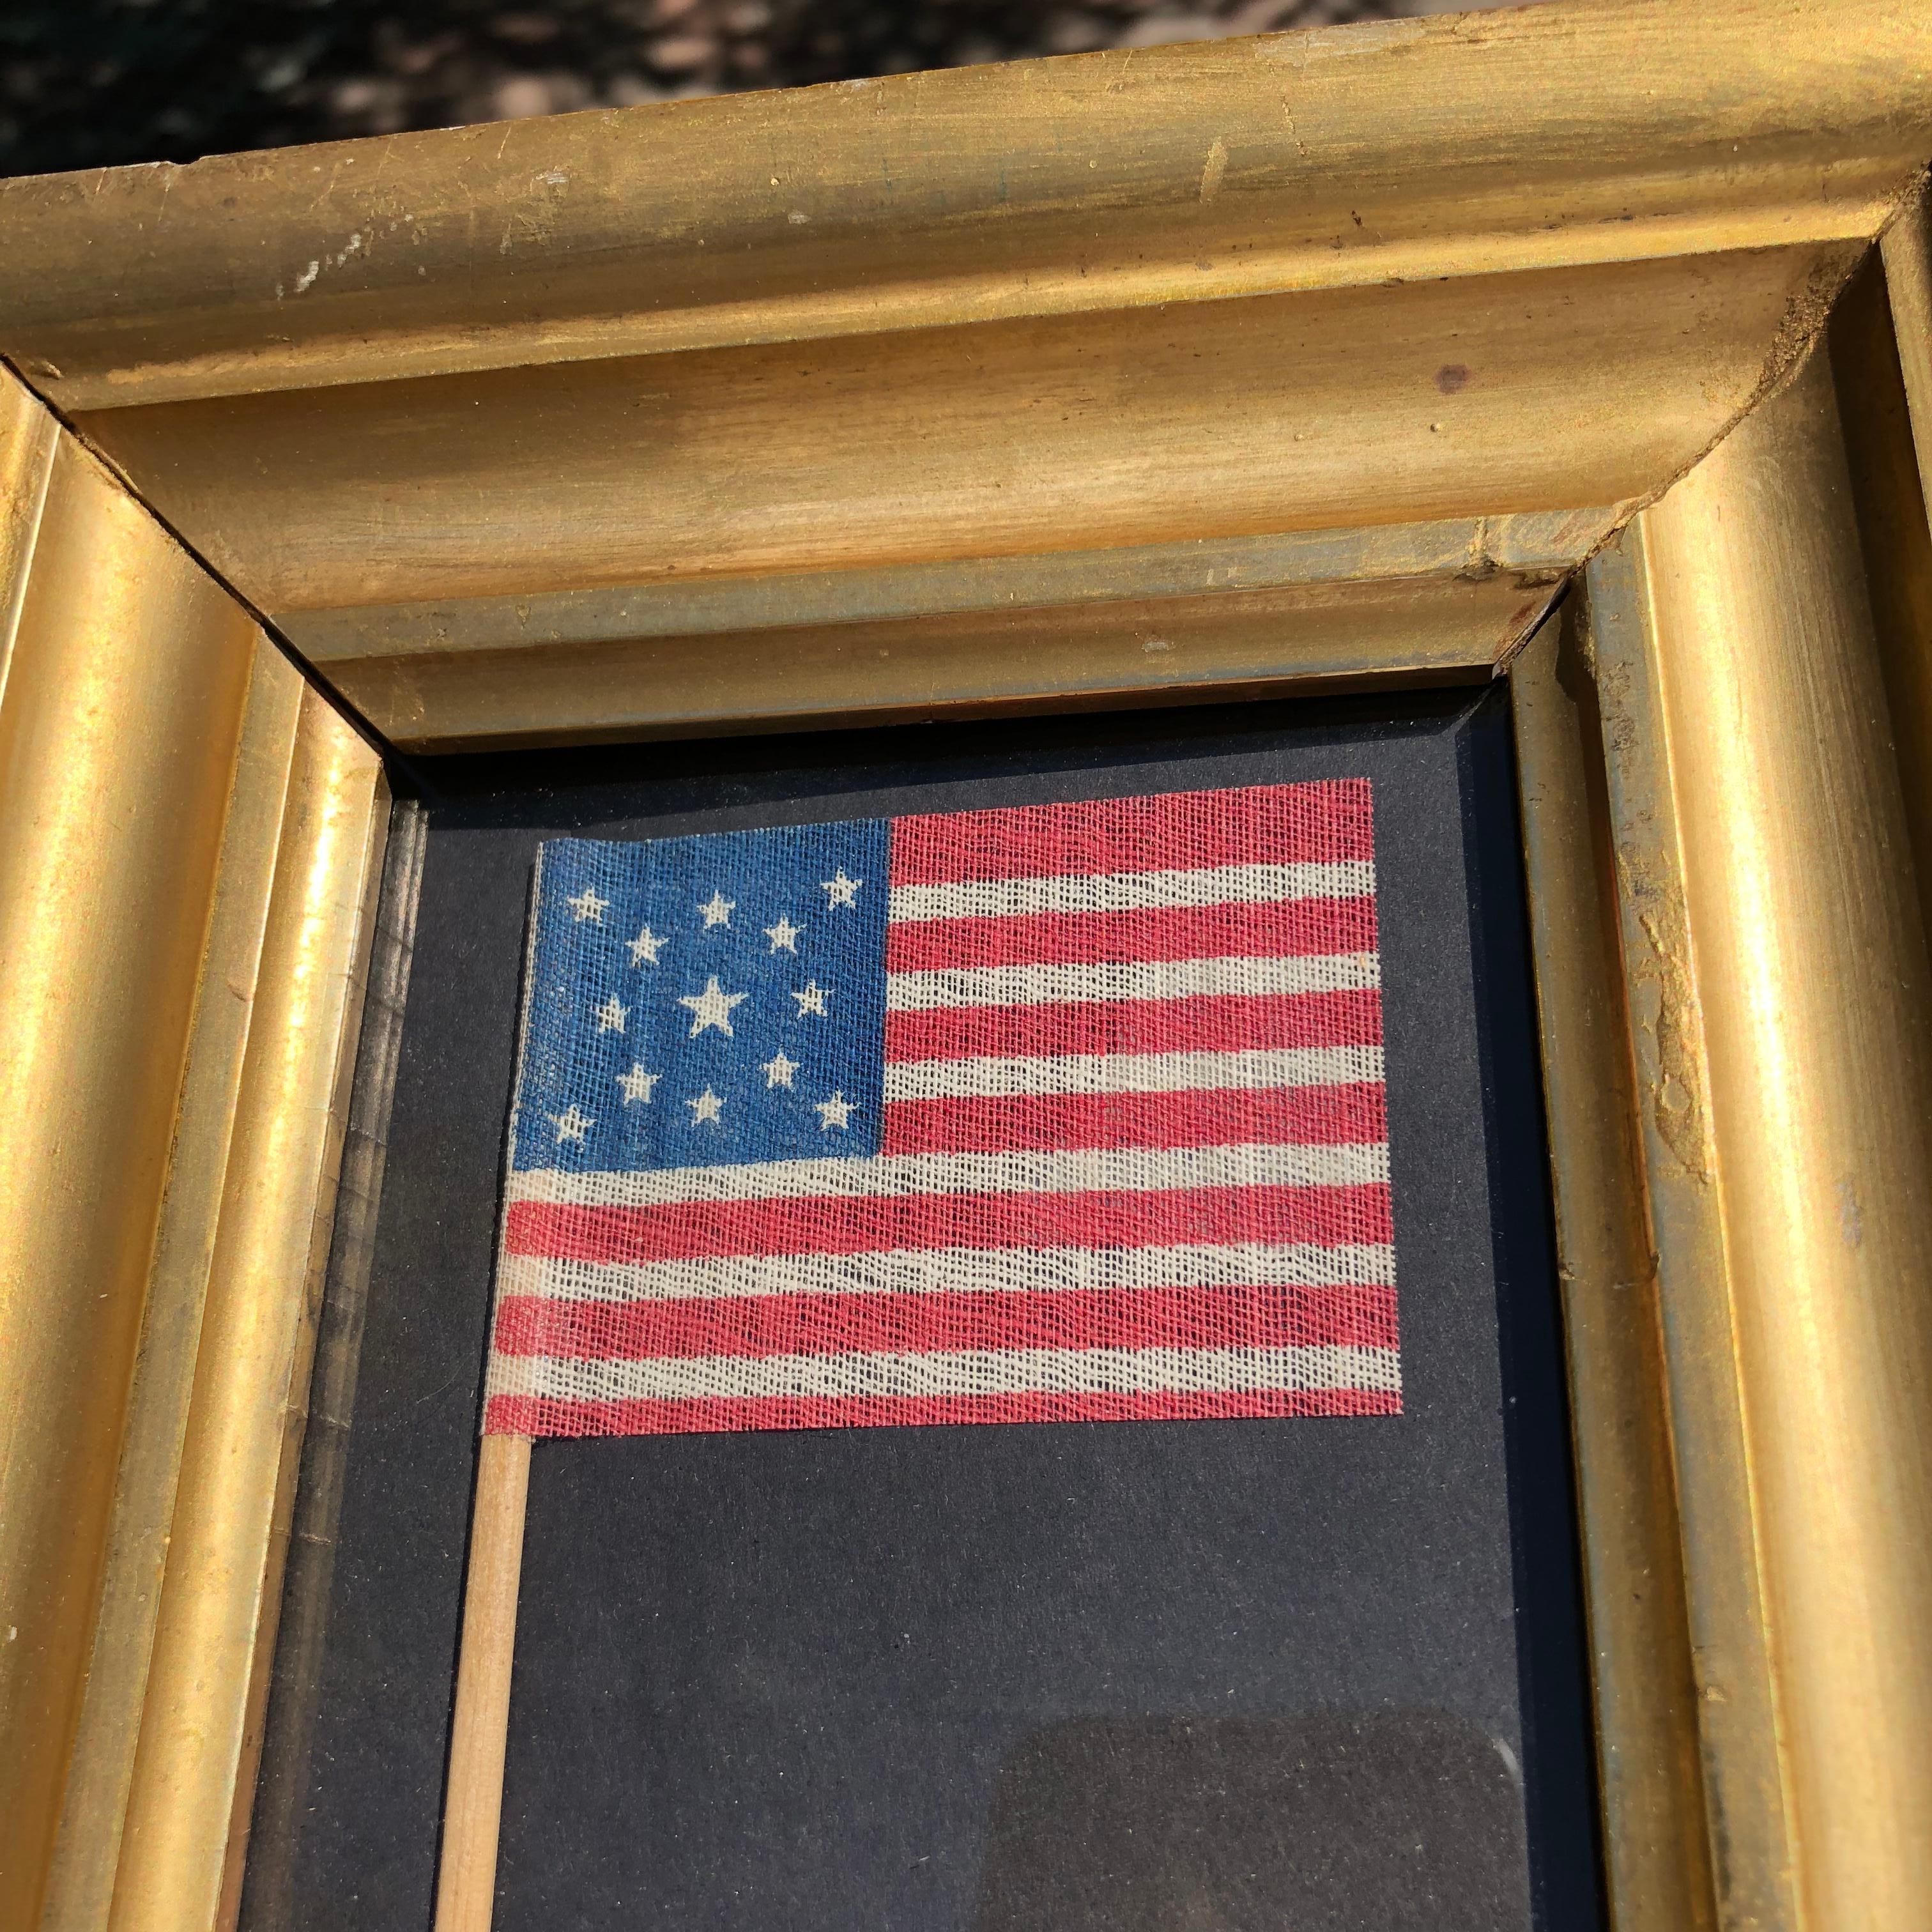 Mounted in a gold frame, printed on cloth these flags were used in 1876 to celebrate the centennial.